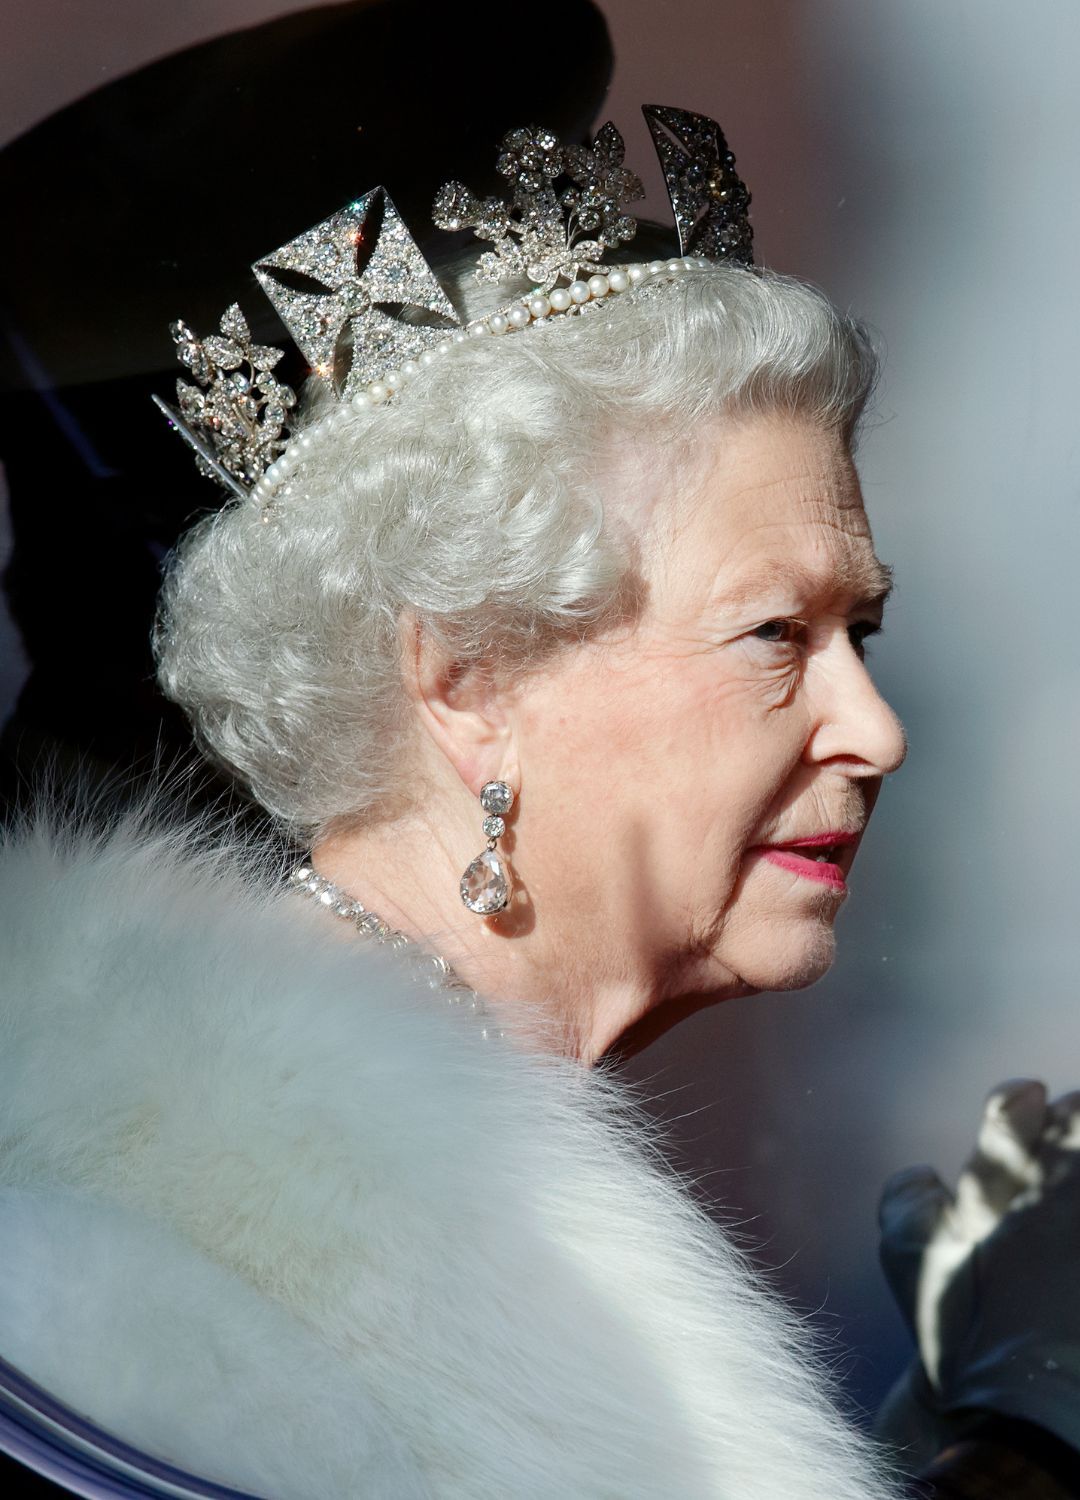 <p>                     The late Queen Elizabeth II, pictured here wearing the Diamond Diadem tiara, was renowned for always looking her absolute best whenever attending public events. The tiara she wore to the 2006 Opening of Parliament is a particularly important one as it has been passed down through the reigning royals since 1820. She wore this tiara on the day of her coronation in 1953. Fun Queen Elizabeth fact: it was the third crown or tiara the Queen wore that day.                   </p>